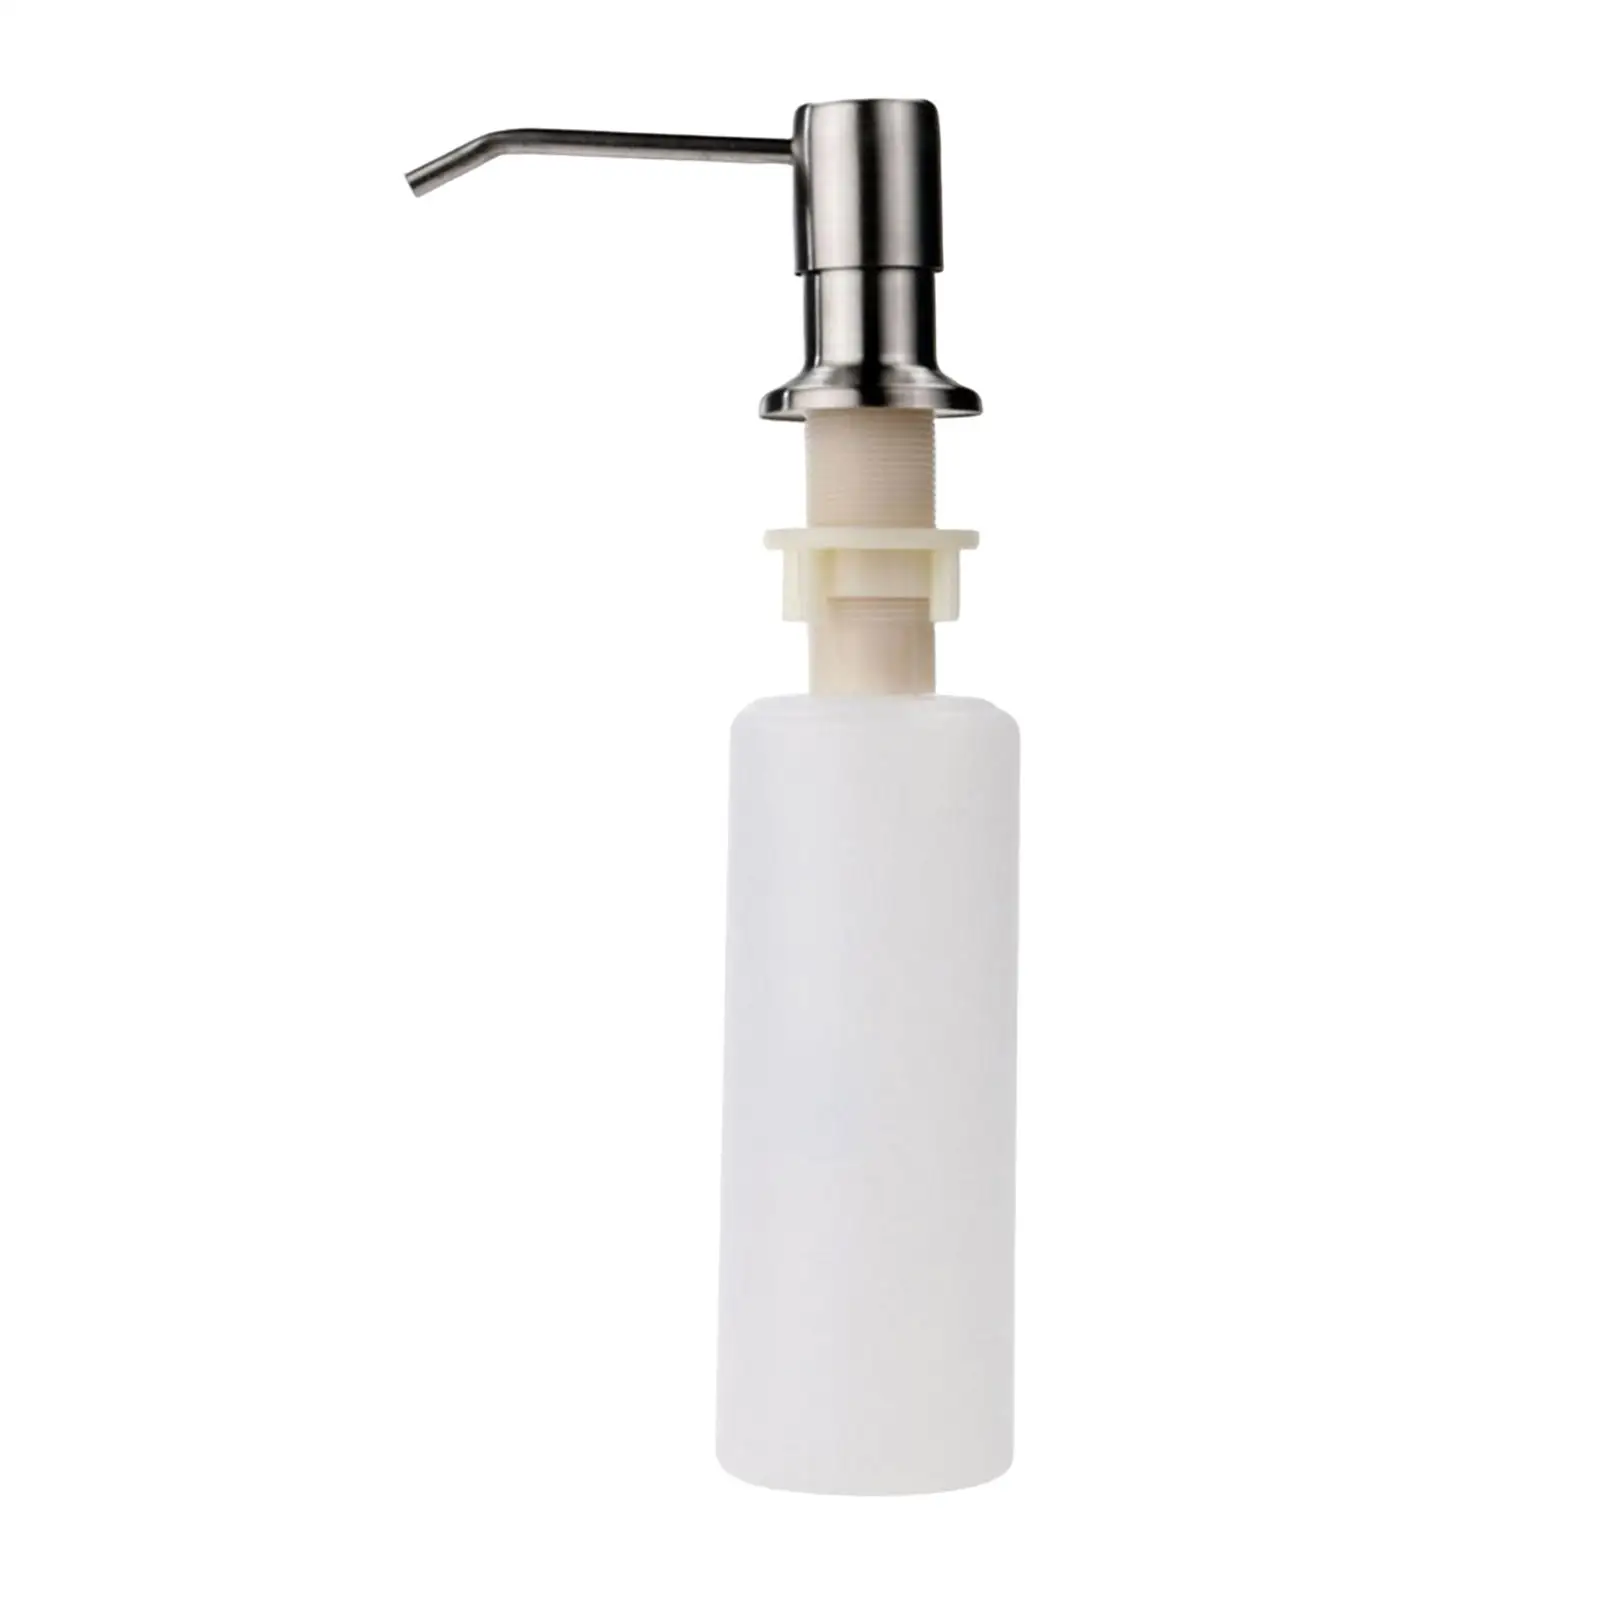 300ml Liquid Soap Dispenser Universal Lotion Bottle Pump Stainless Steel for Sink Opening 25mm~36mm Bathroom Hotel Supply Office